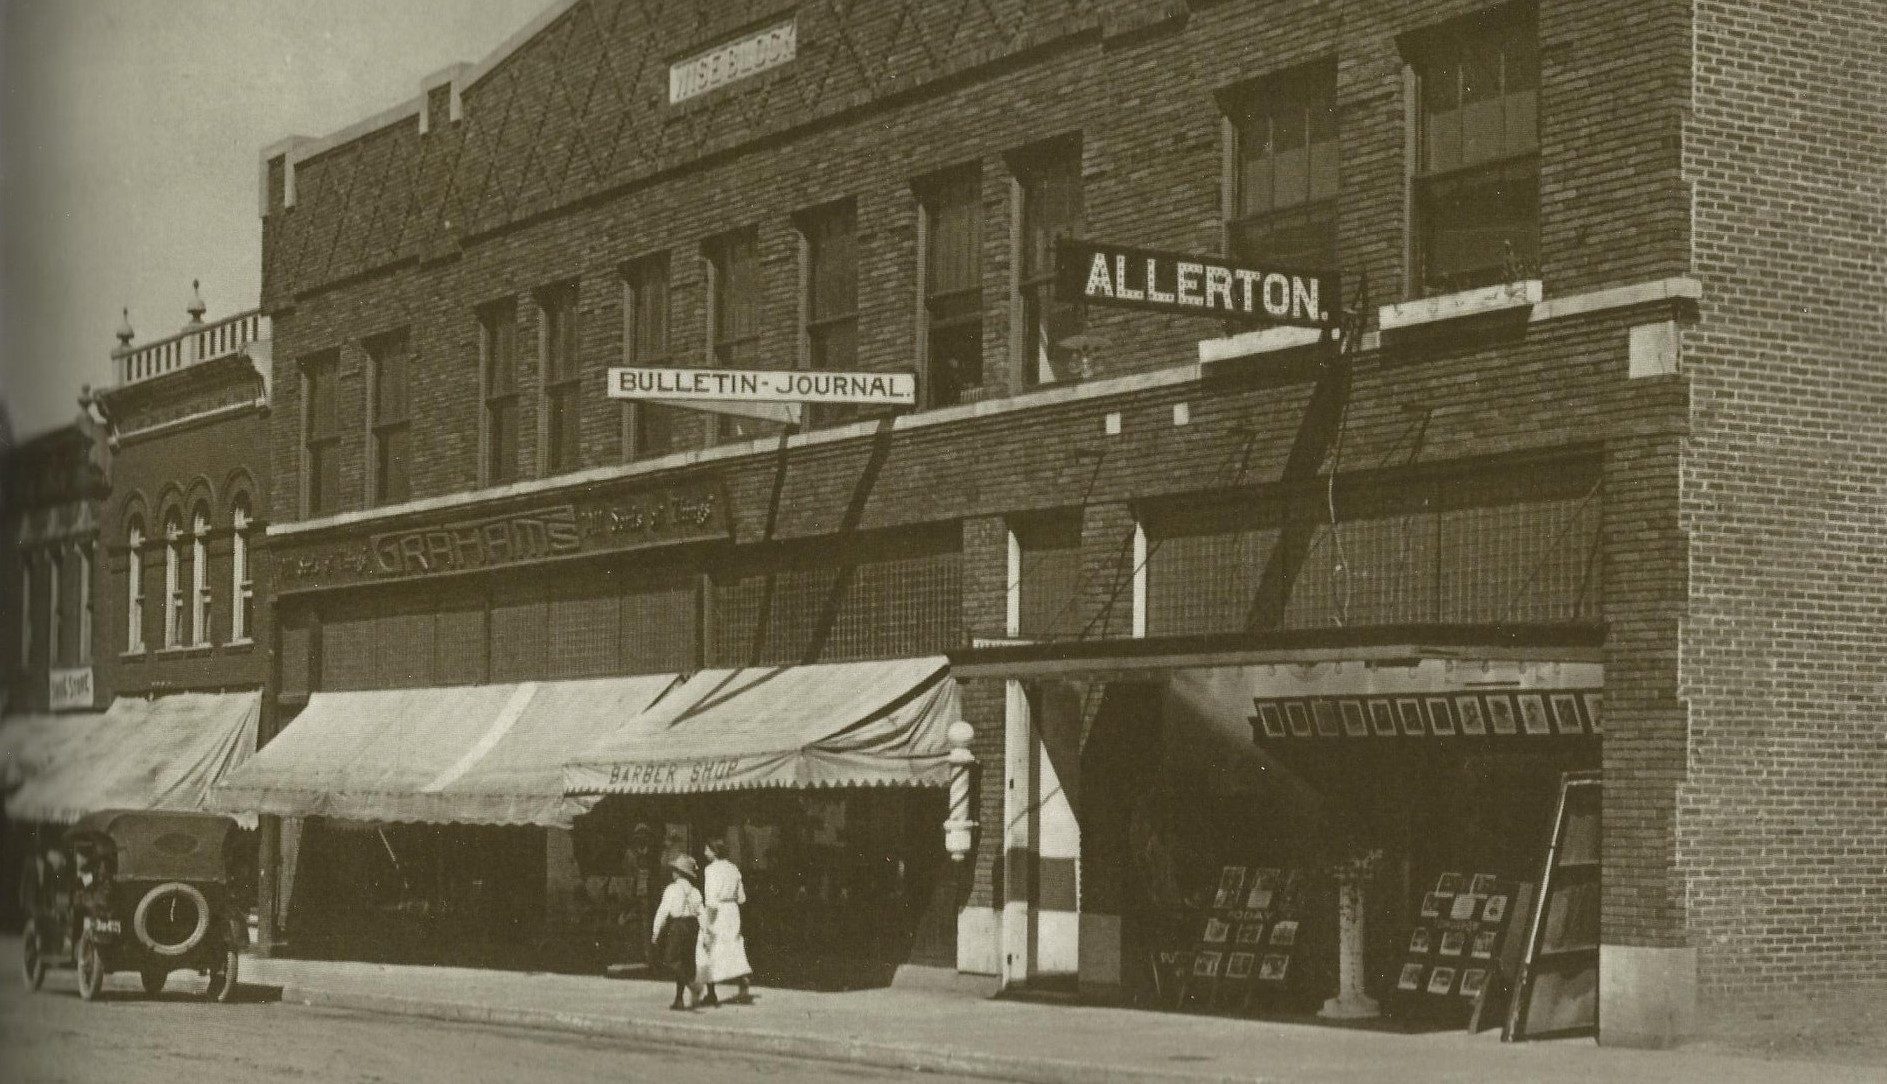 The "Allerton" aka "Iowa Theater" located at 312 1st St. E. Some of the oldest buildings were torn down to make room for the Wise Garage, built in 1914. 2nd floor was Bulletin Journal office. Now home of Hardware Hank.